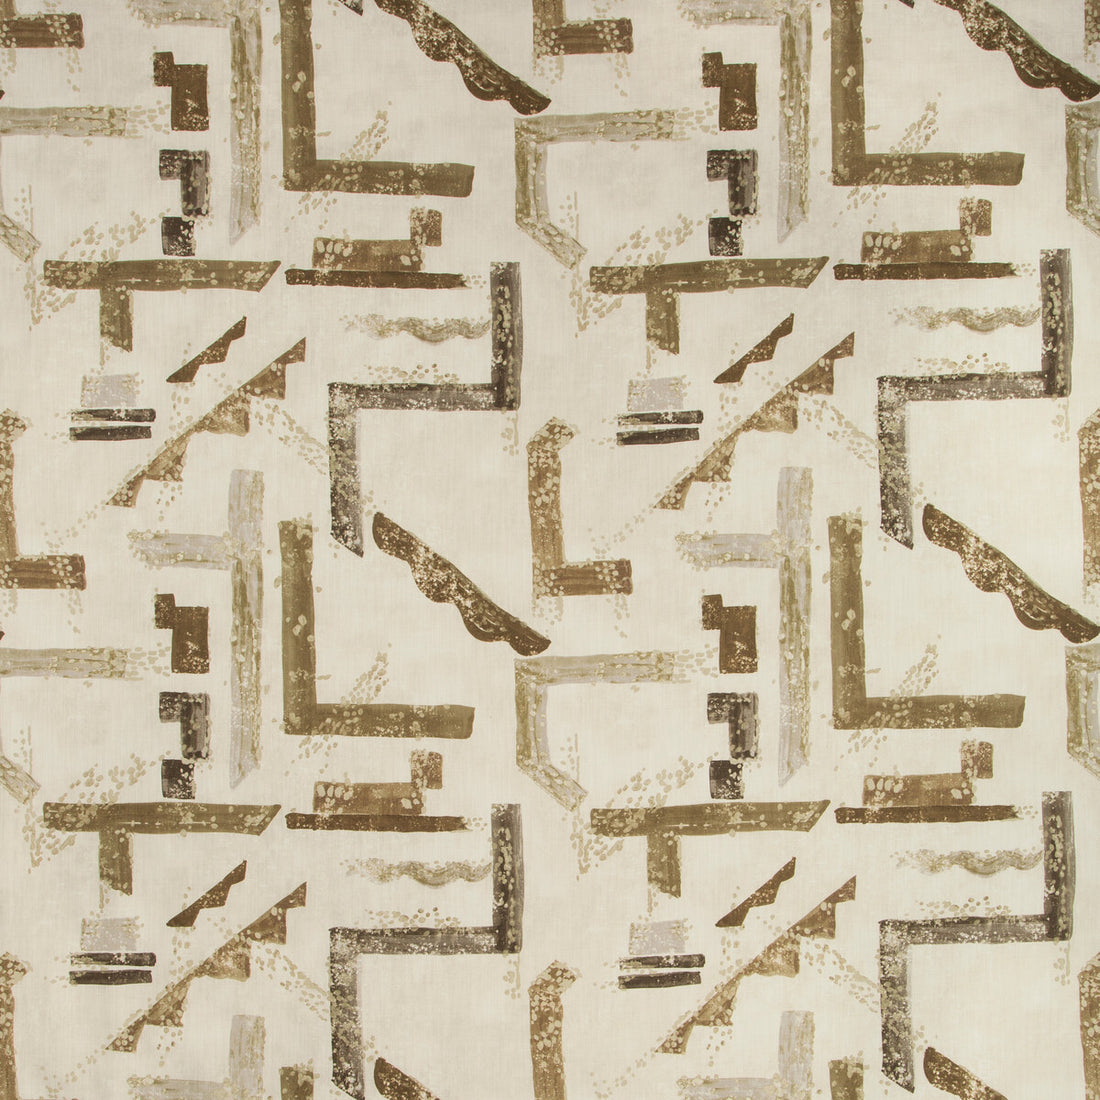 Dessau fabric in sparrow color - pattern DESSAU.416.0 - by Kravet Basics in the Nate Berkus Well-Traveled collection